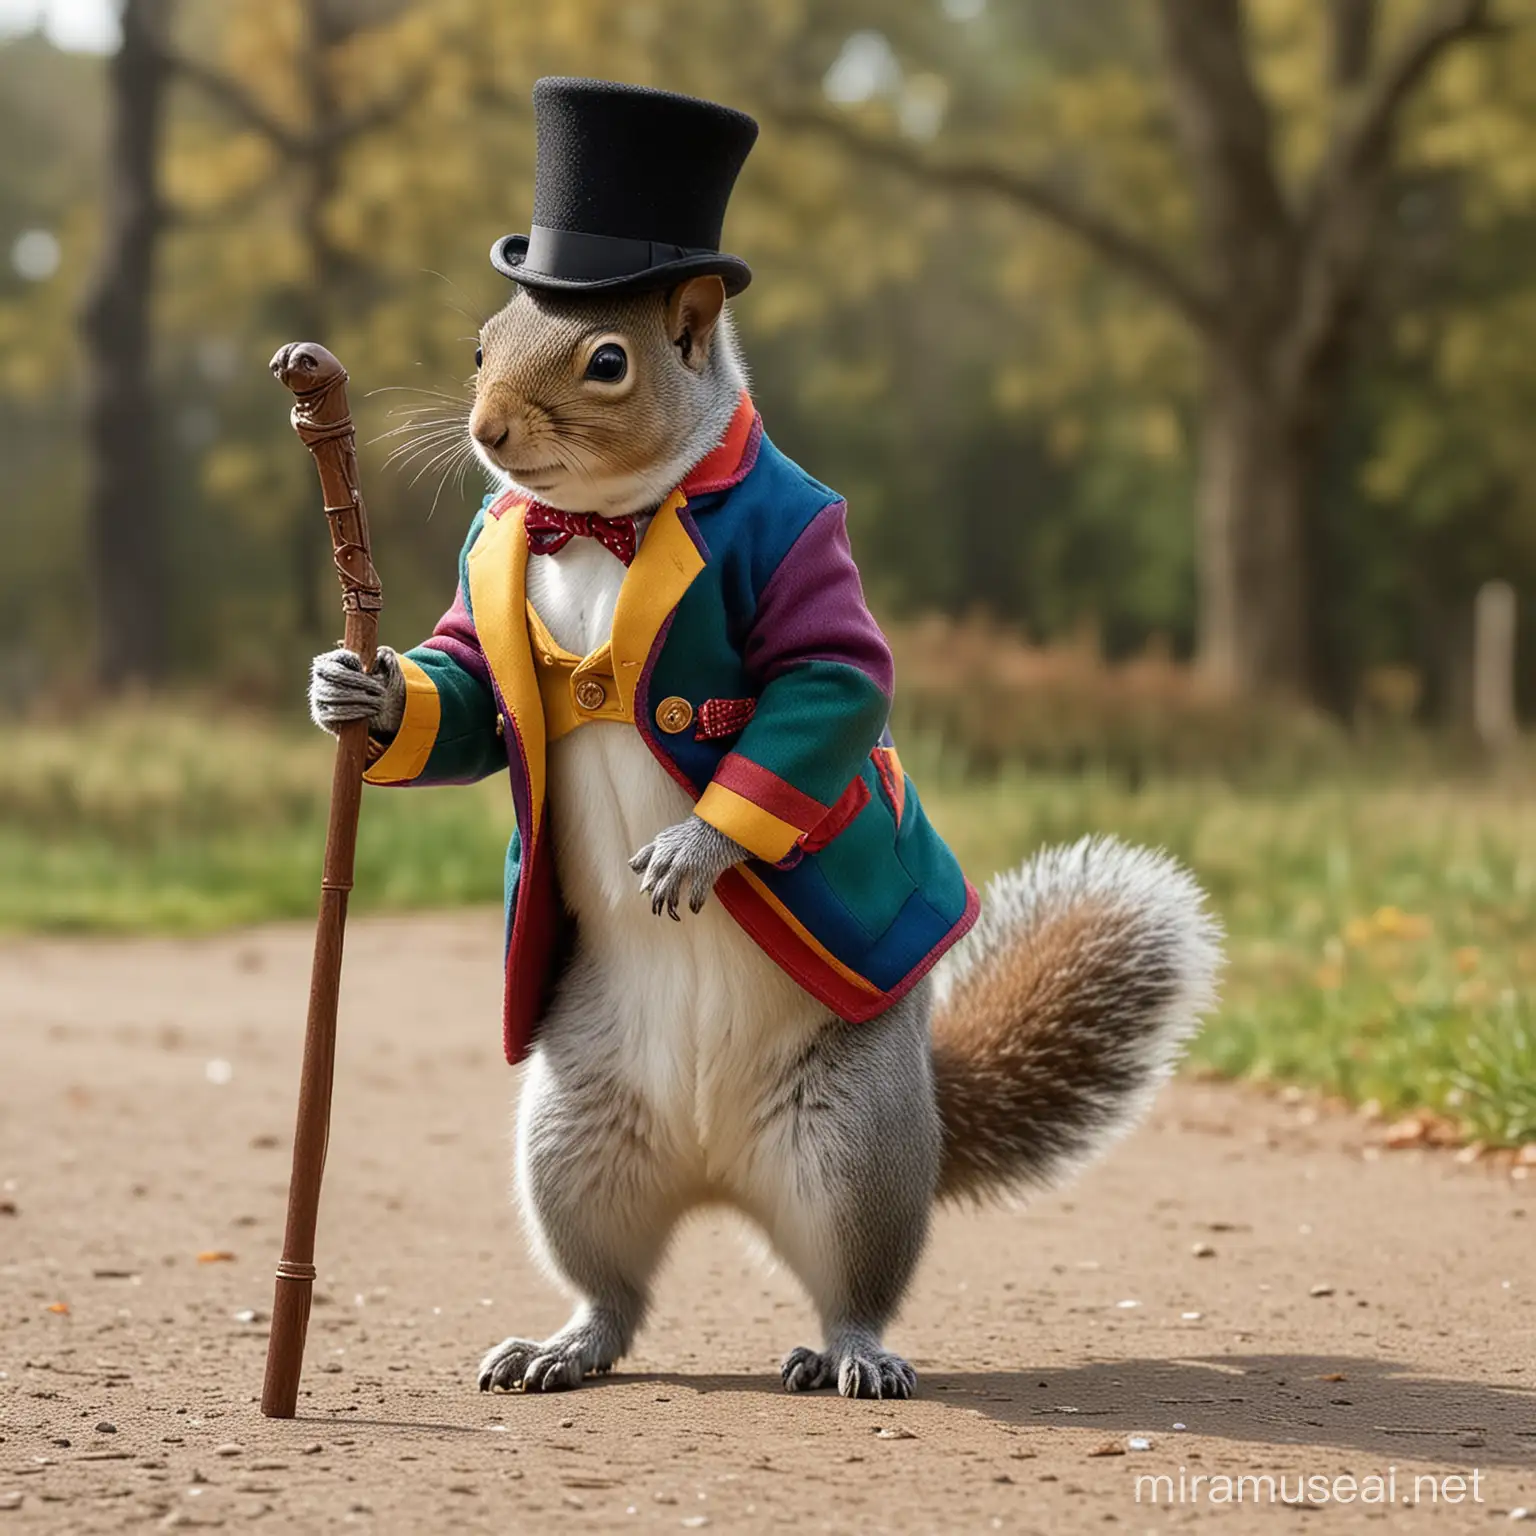 Elegant Squirrel in Multicolored Jacket and Top Hat Walking Upright with Cane